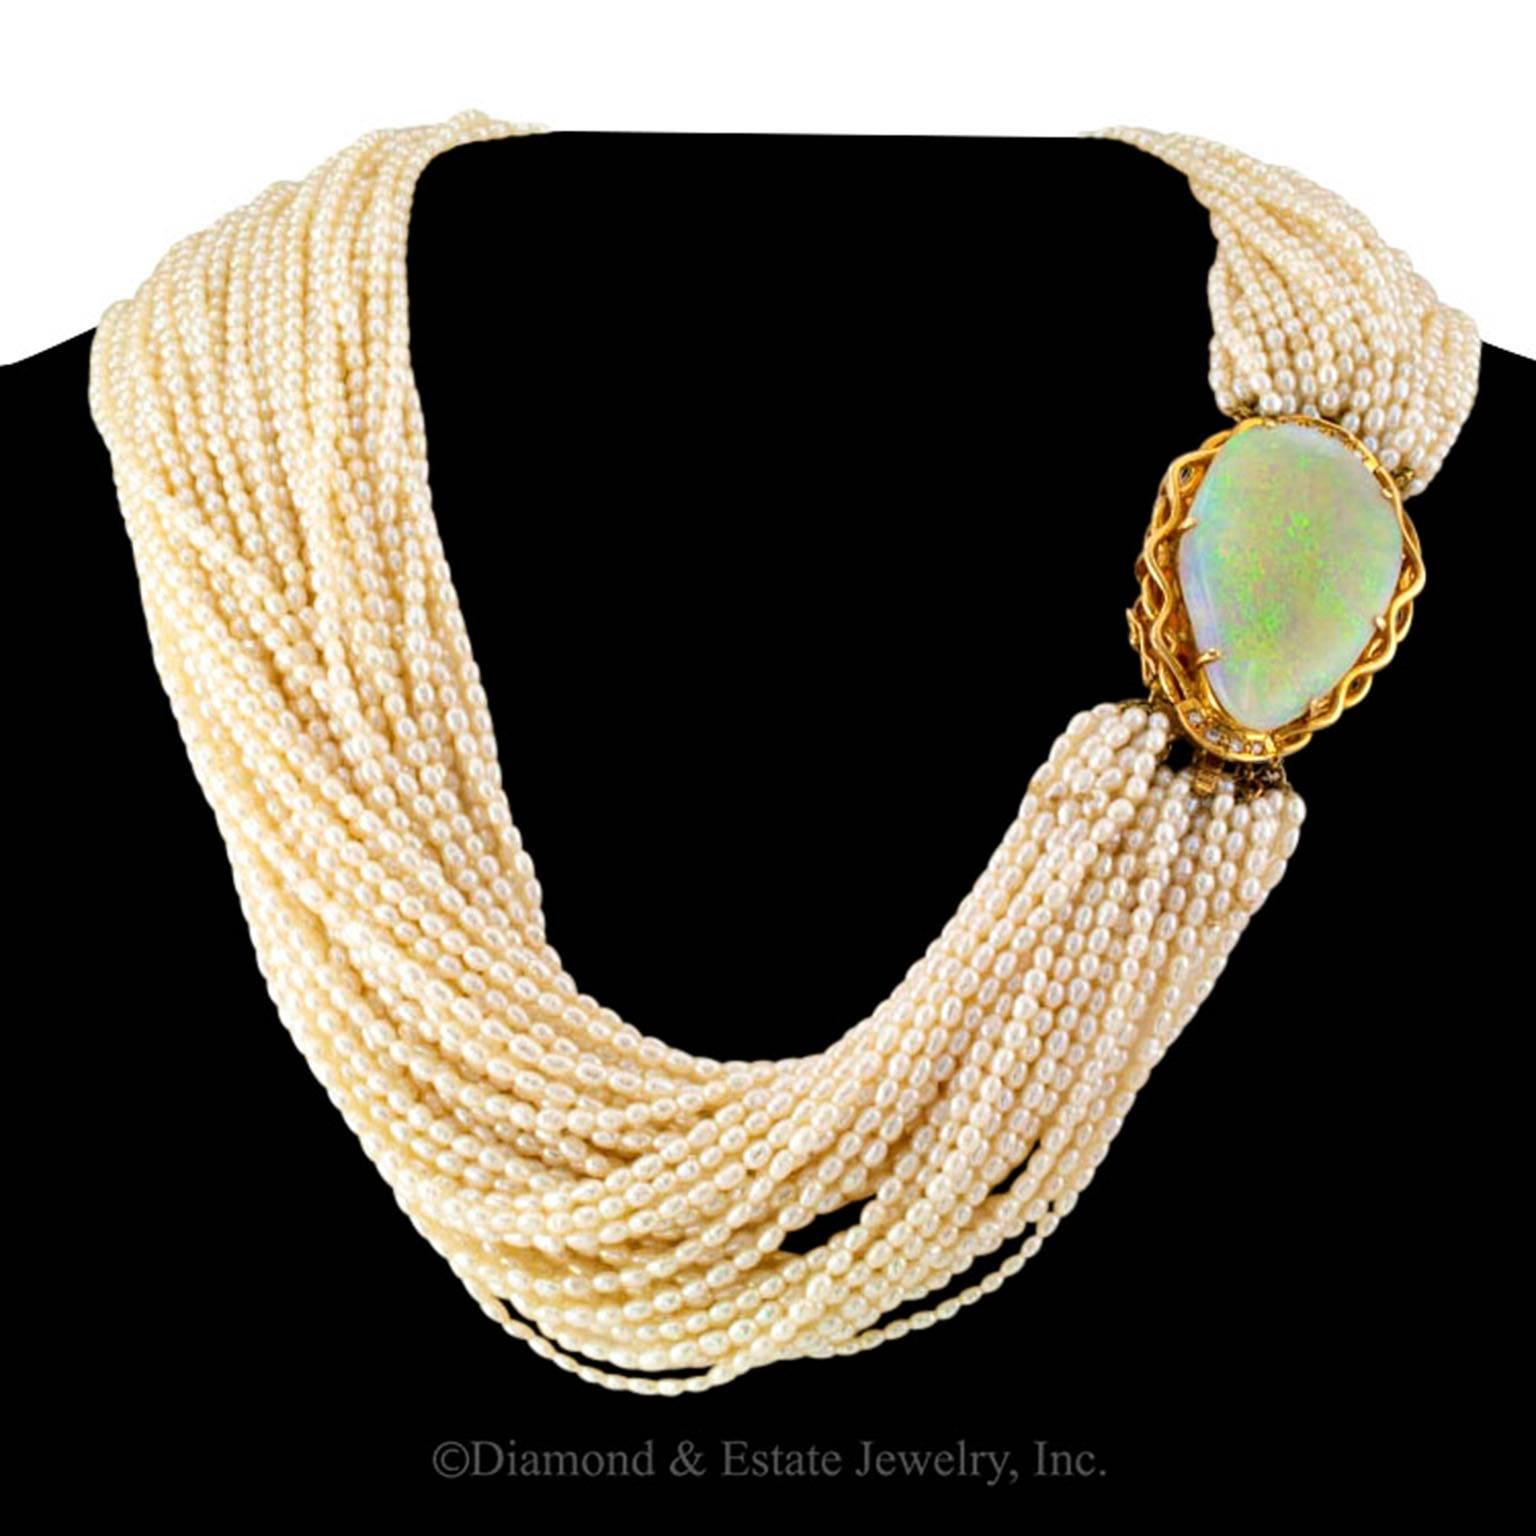 Women's Opal and Fresh Water Pearl Torsade Necklace